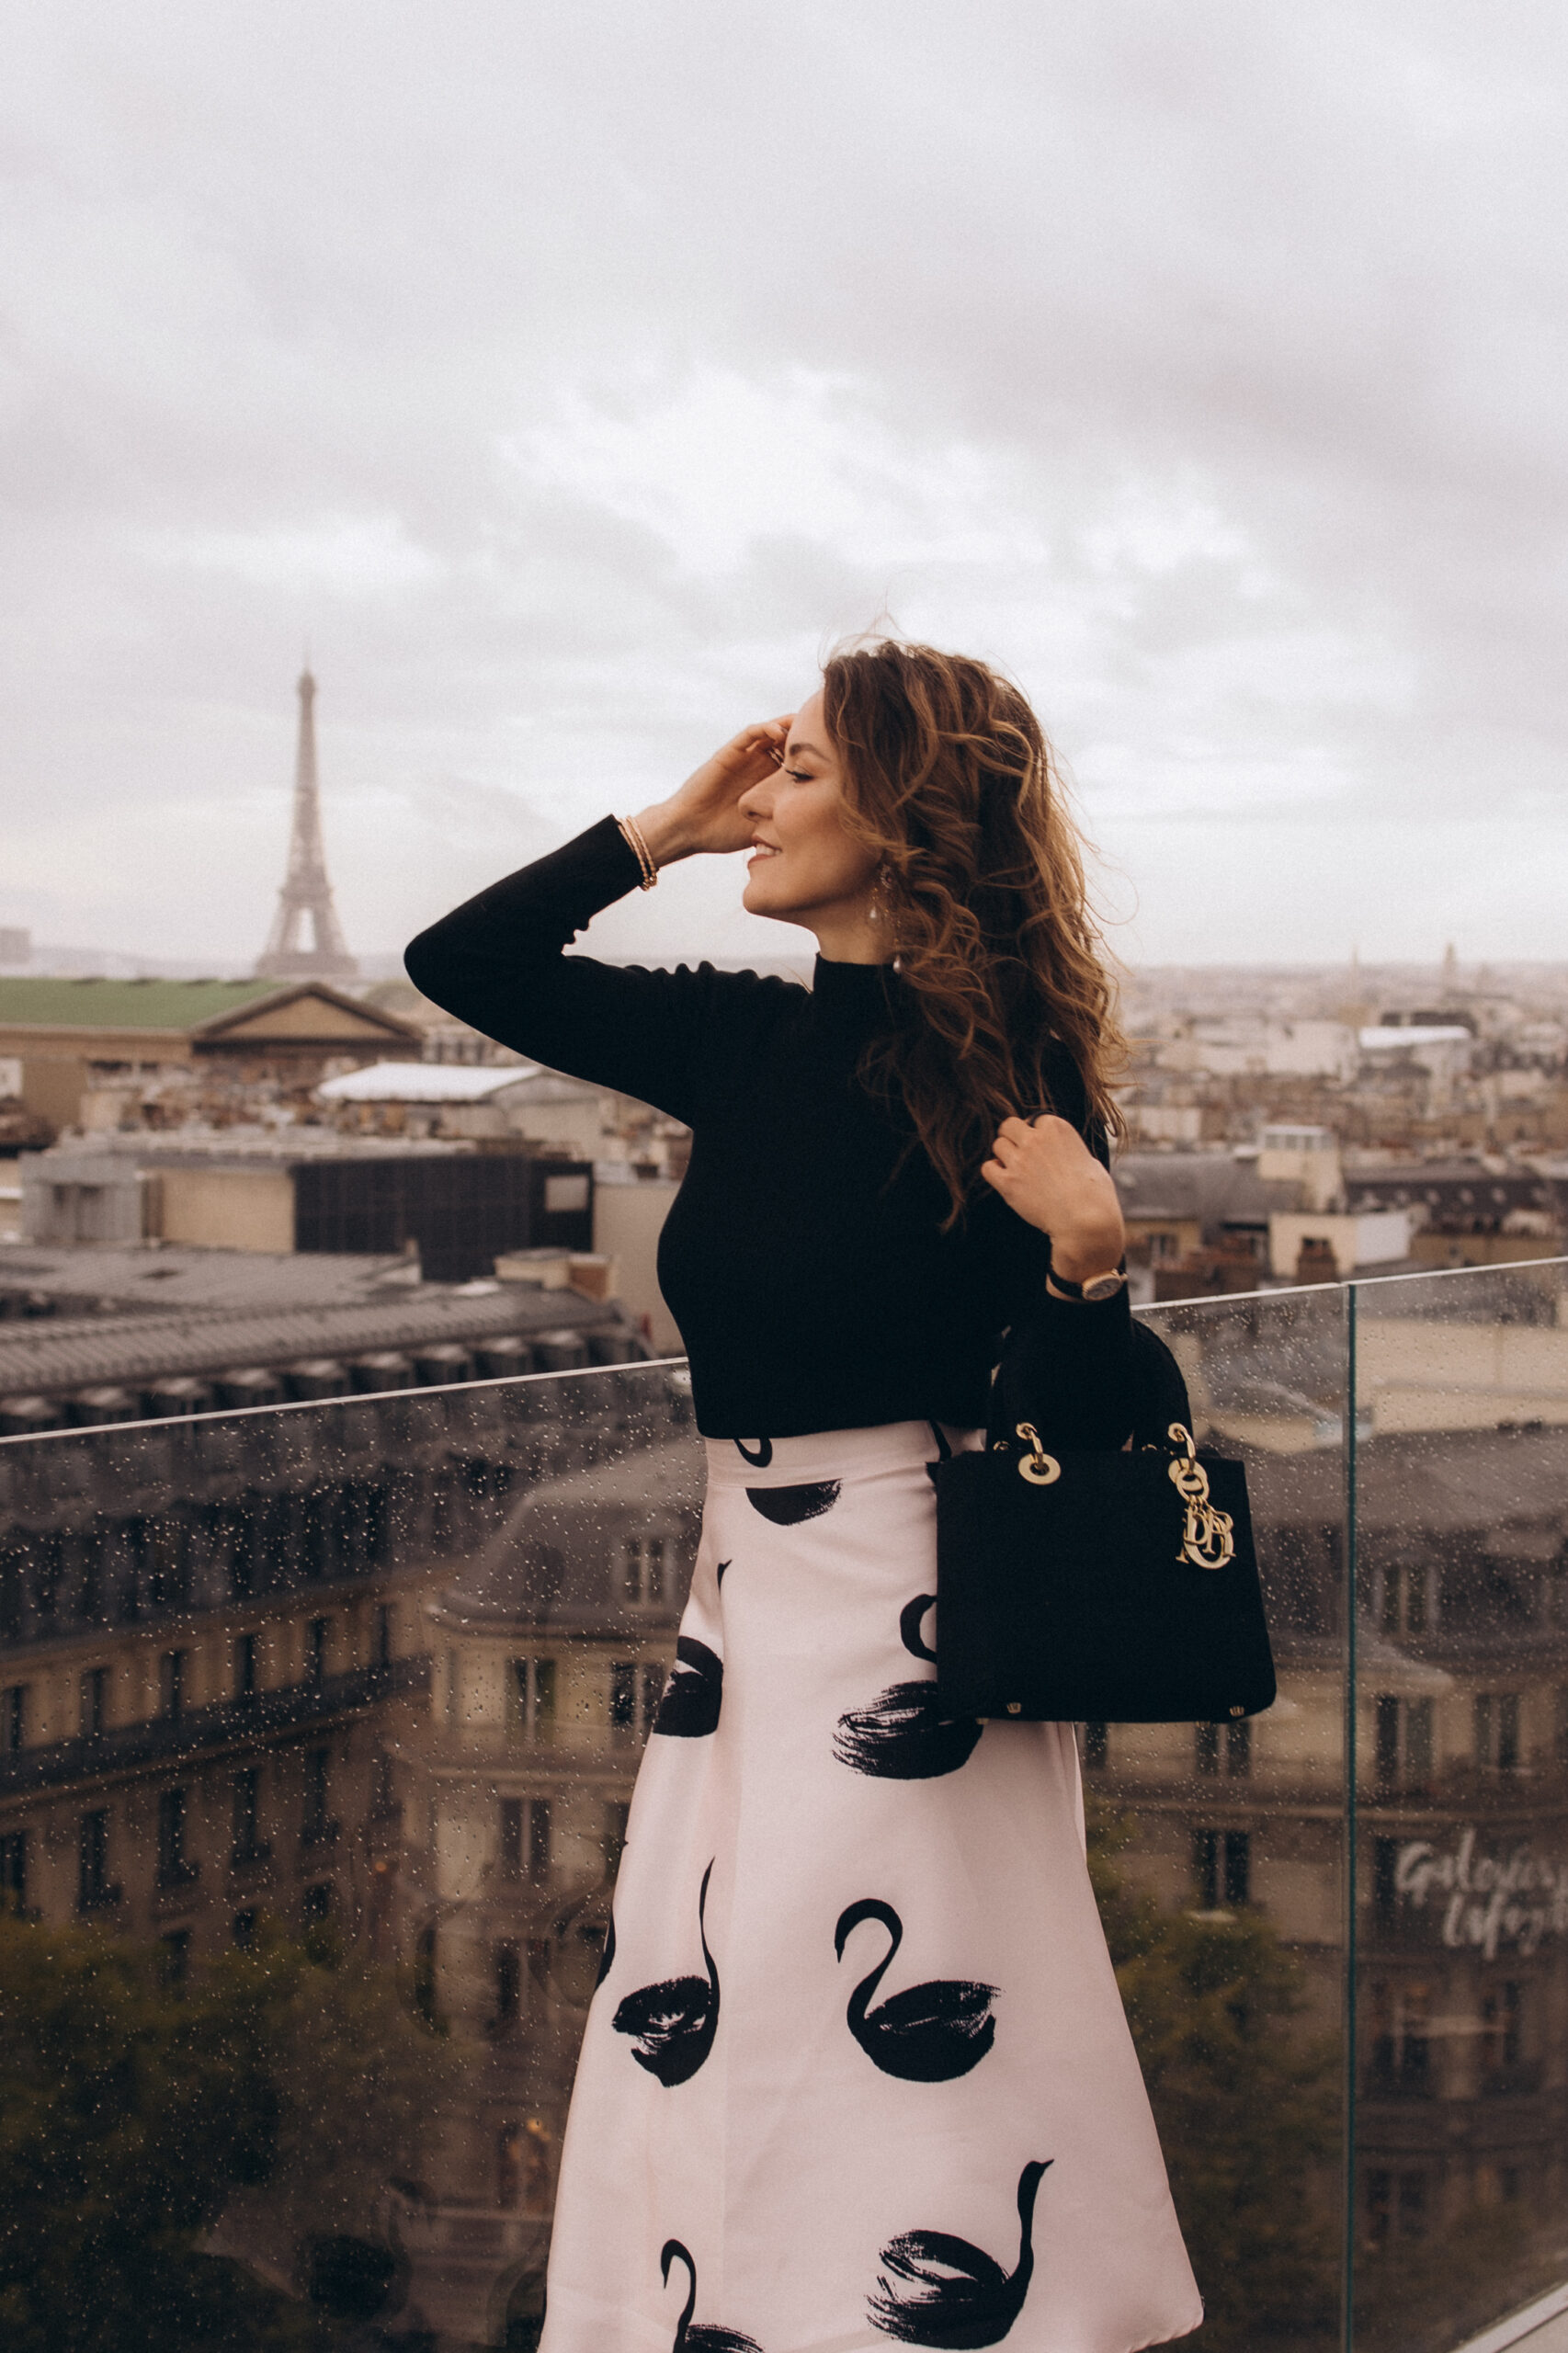 Personal Photoshoot at Galeries Lafayette